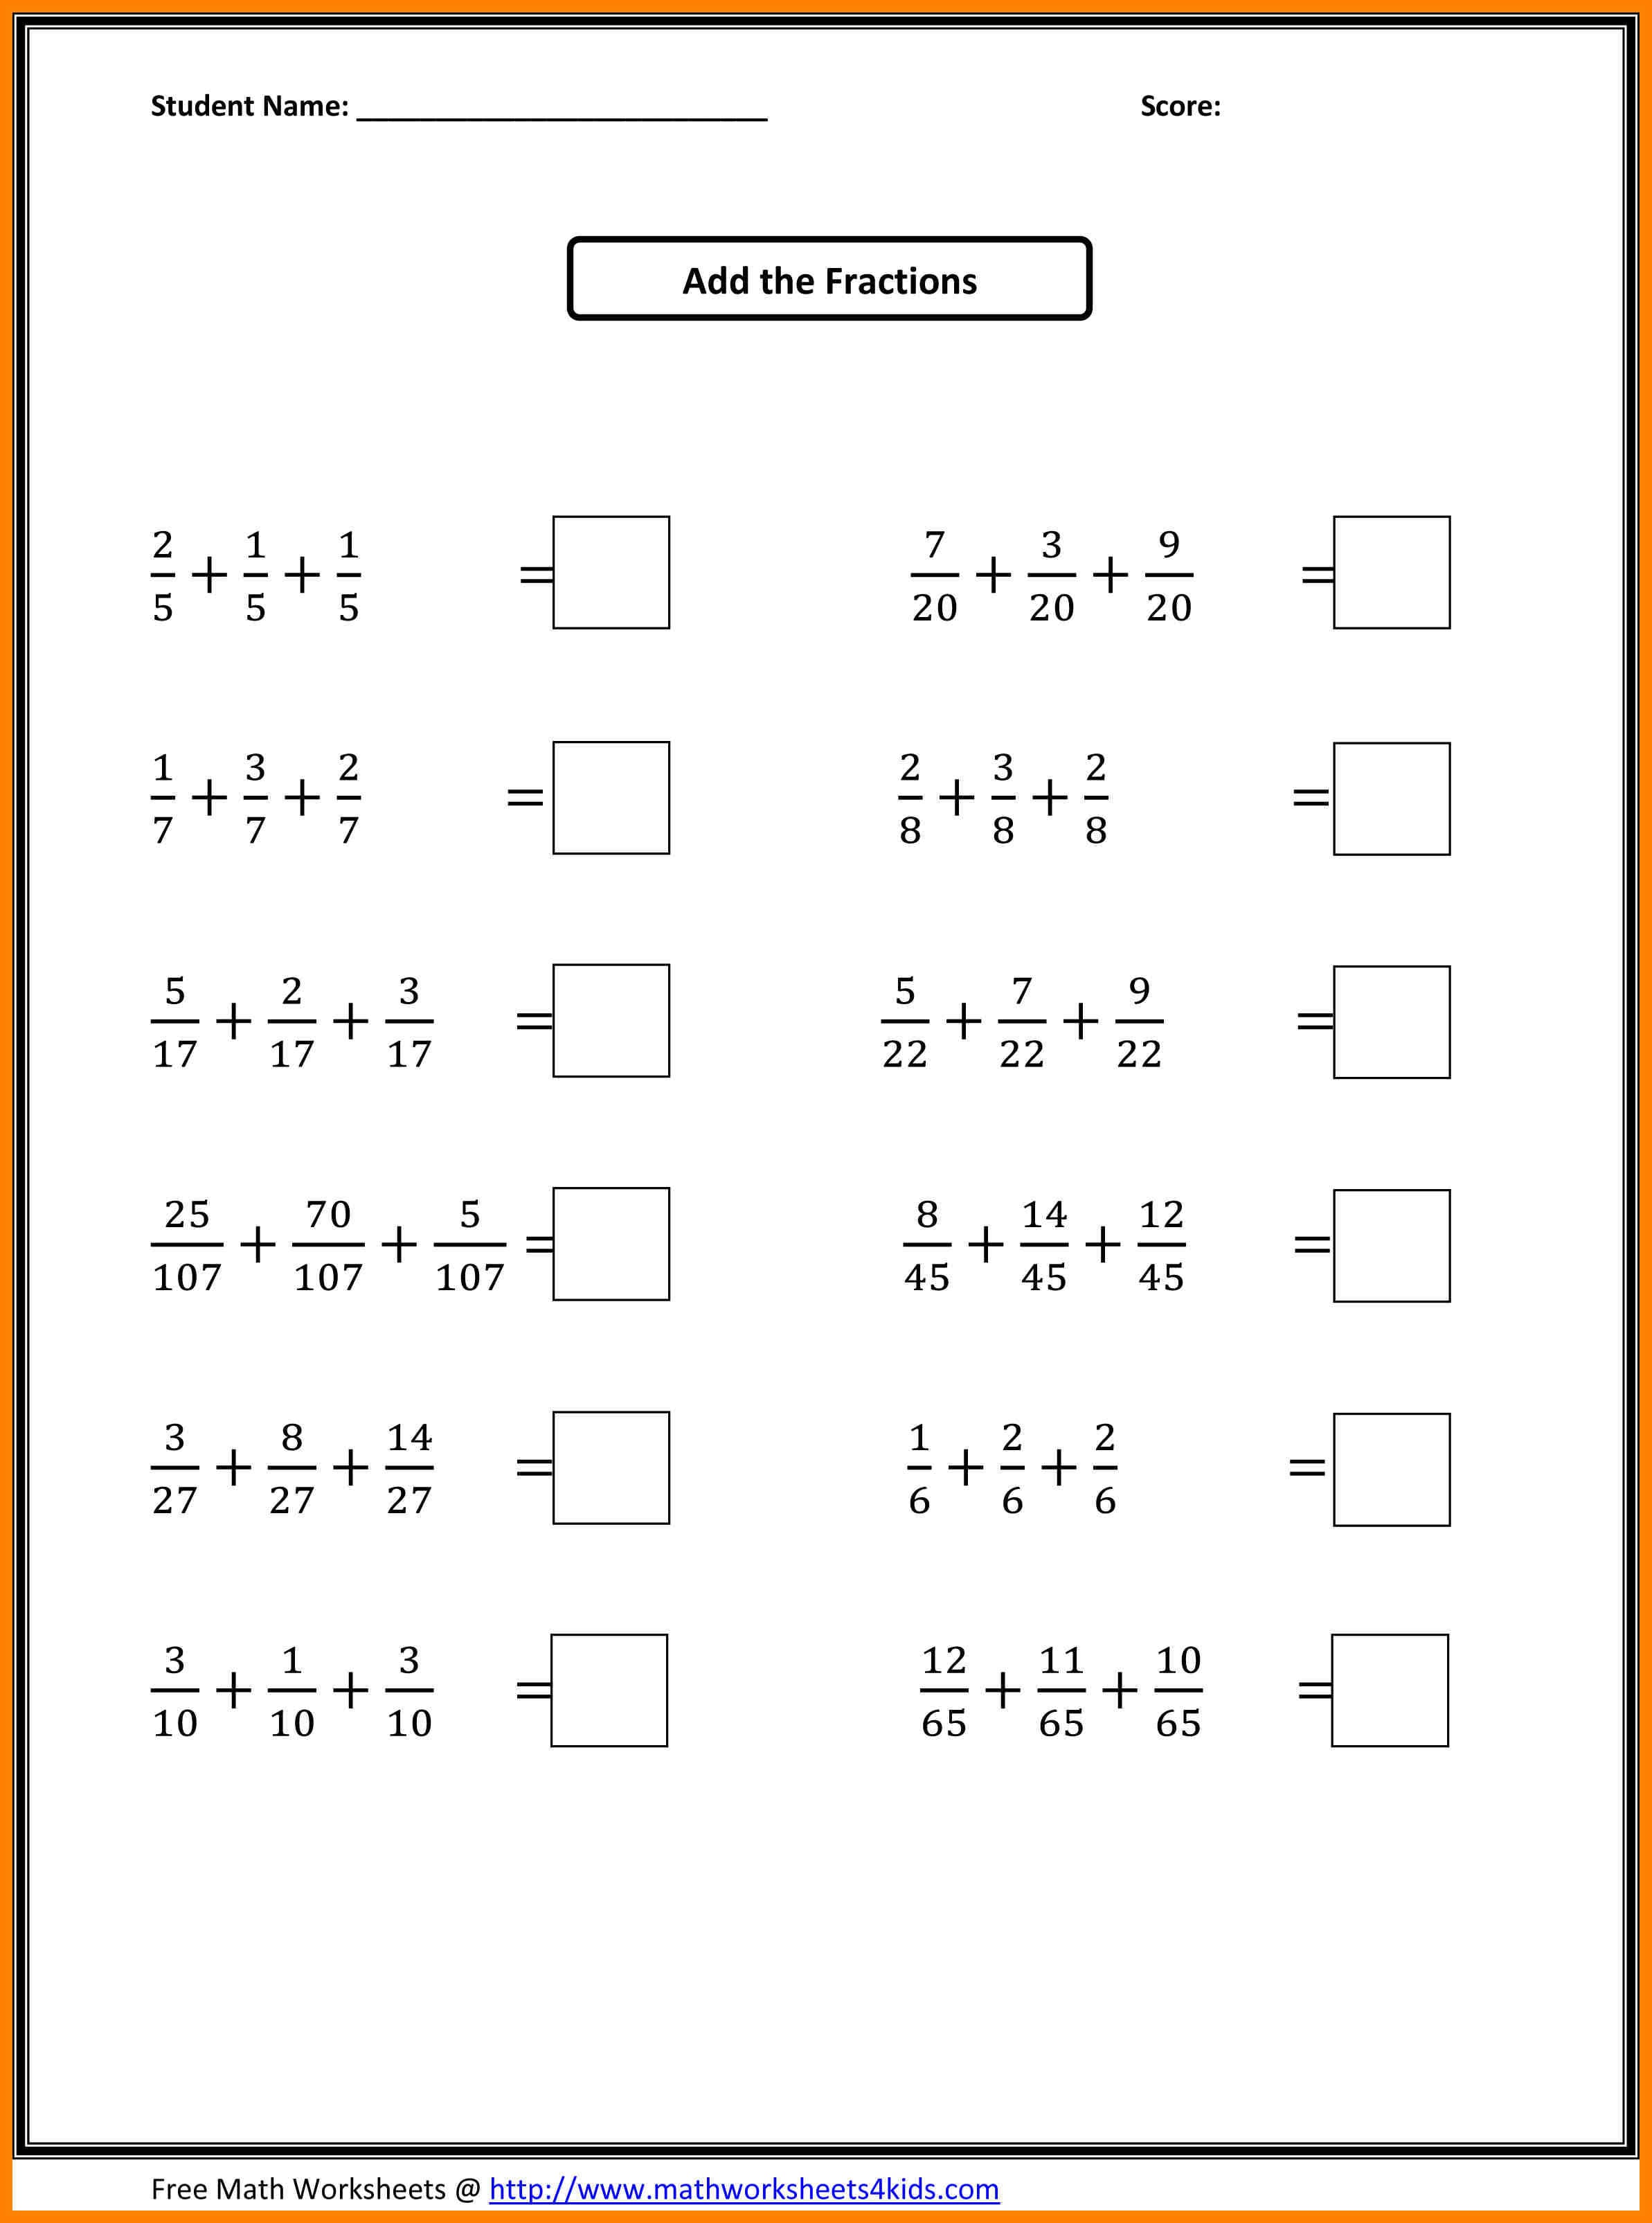 Math Worksheets 4th Grade Fractions 117188